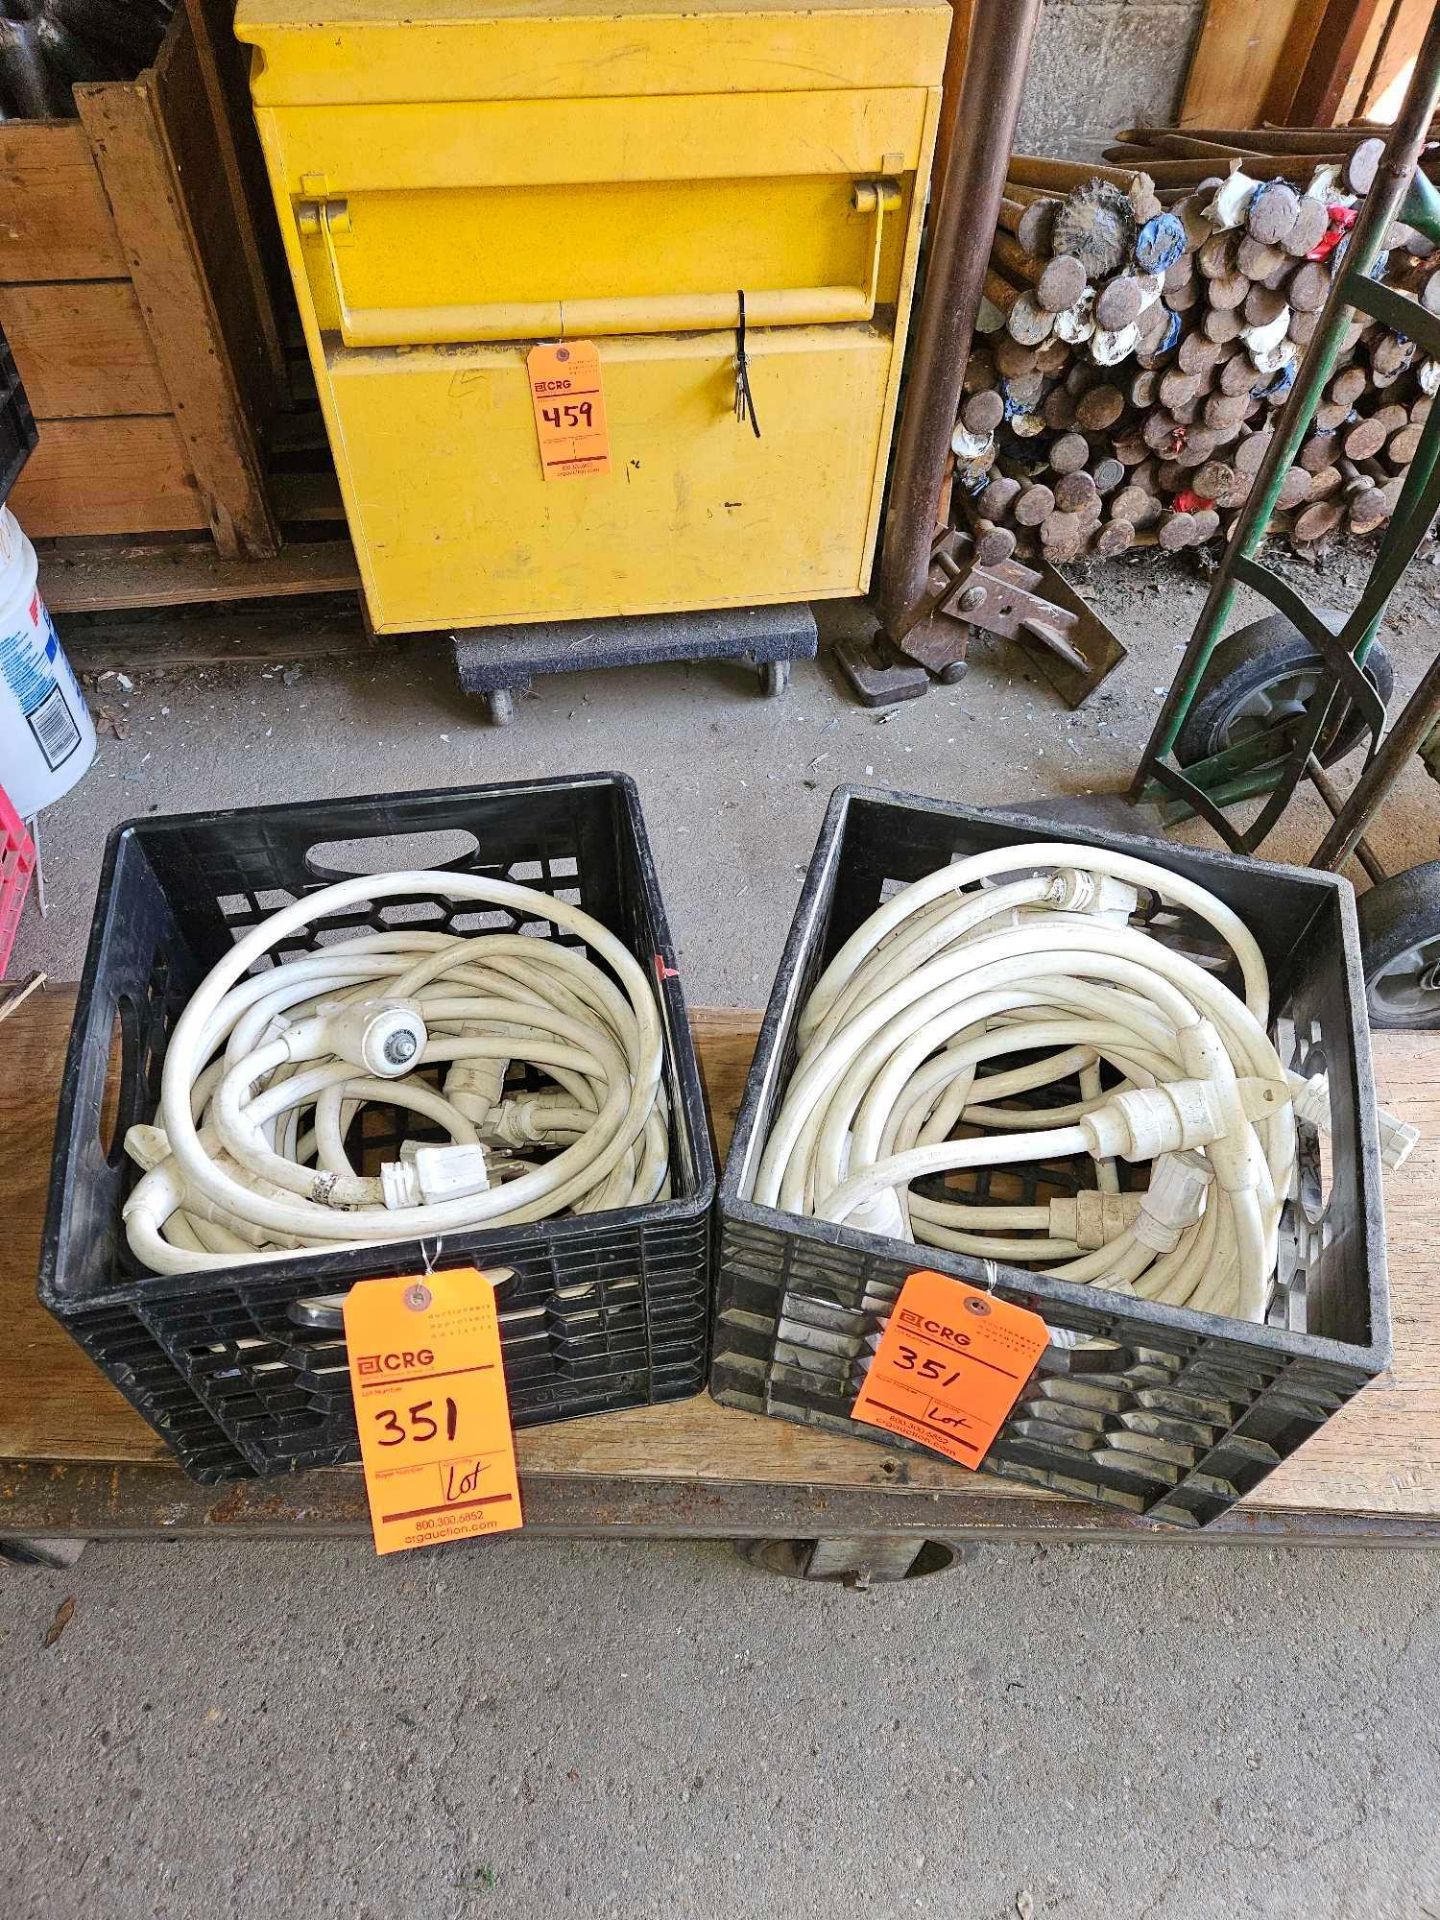 Lot of (2) white 50 foot perimeter cords with 2 foot drop outlets every 10 feet